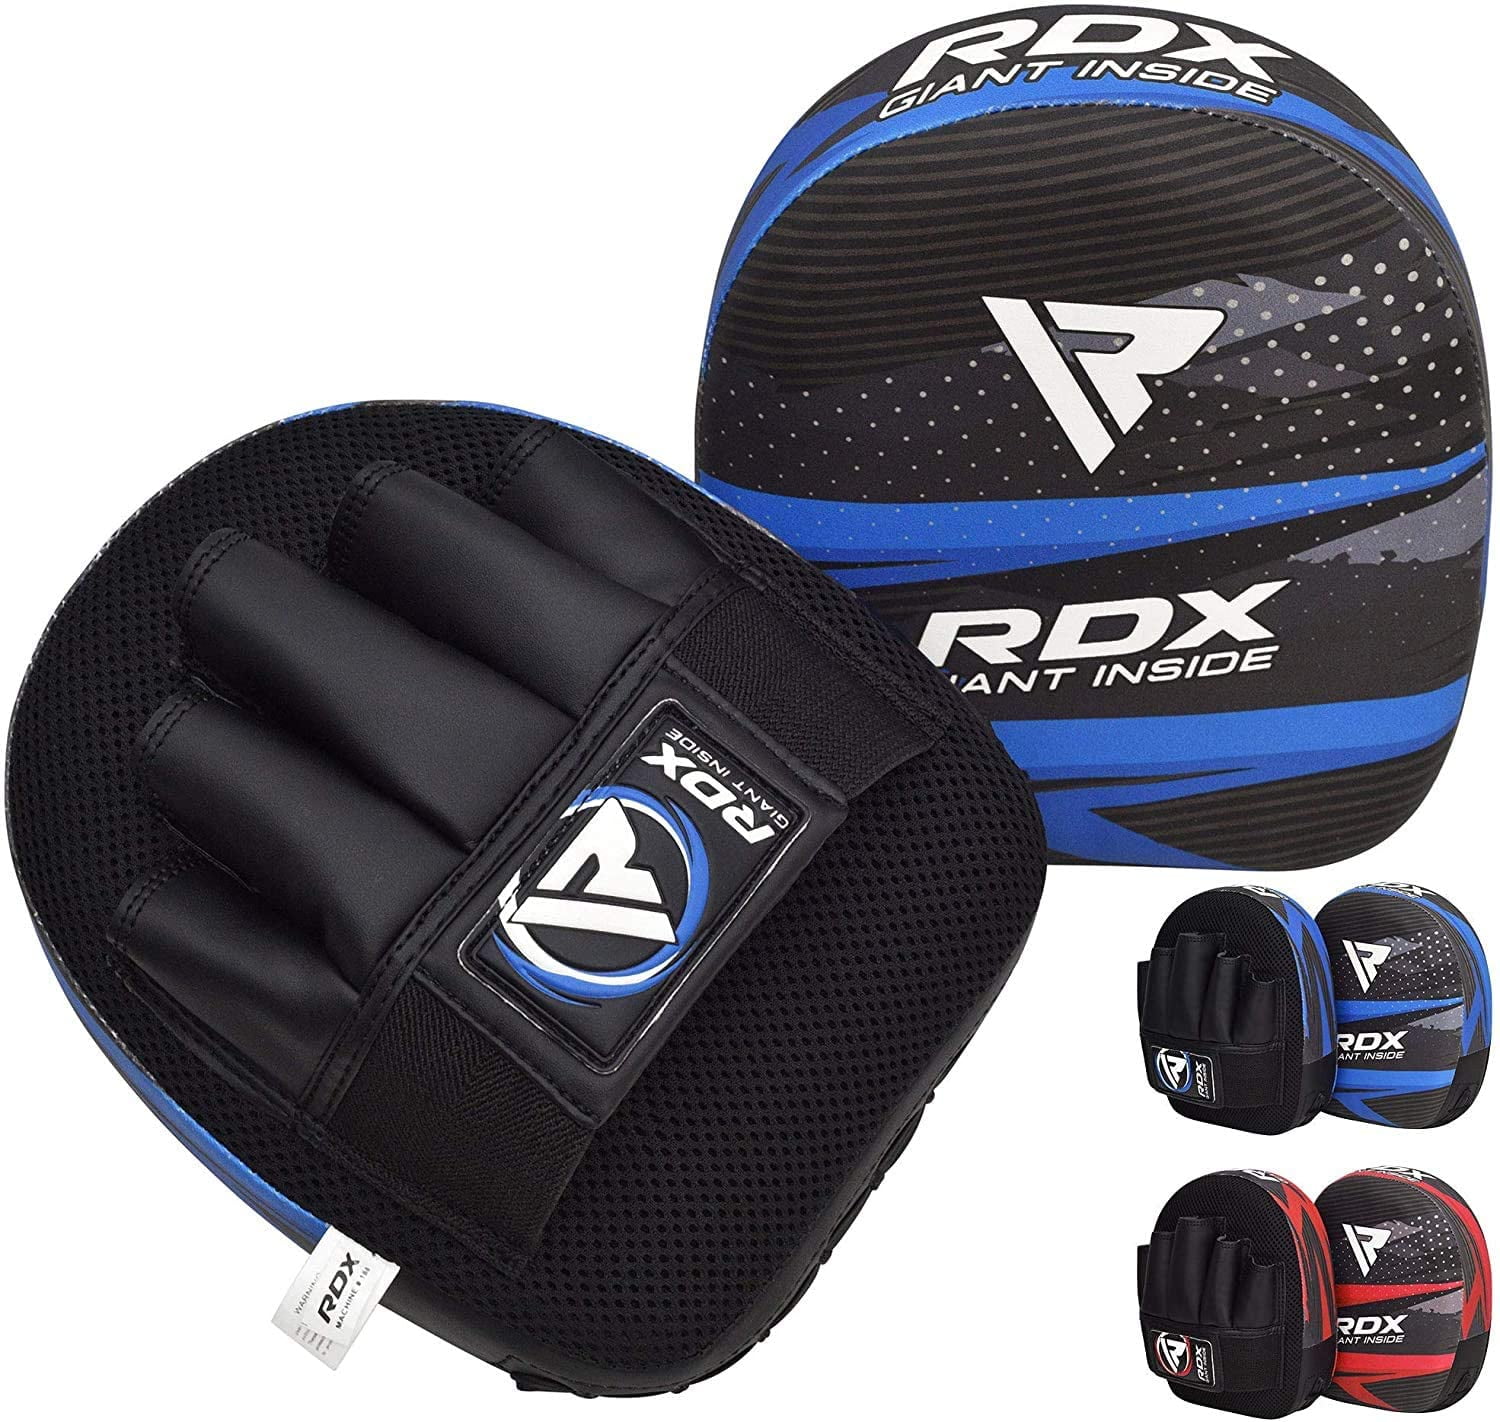 Details about   RDX Boxing Pads Training Focus Mitts MMA Hook & Jab Target Muay Thai Kickboxing 